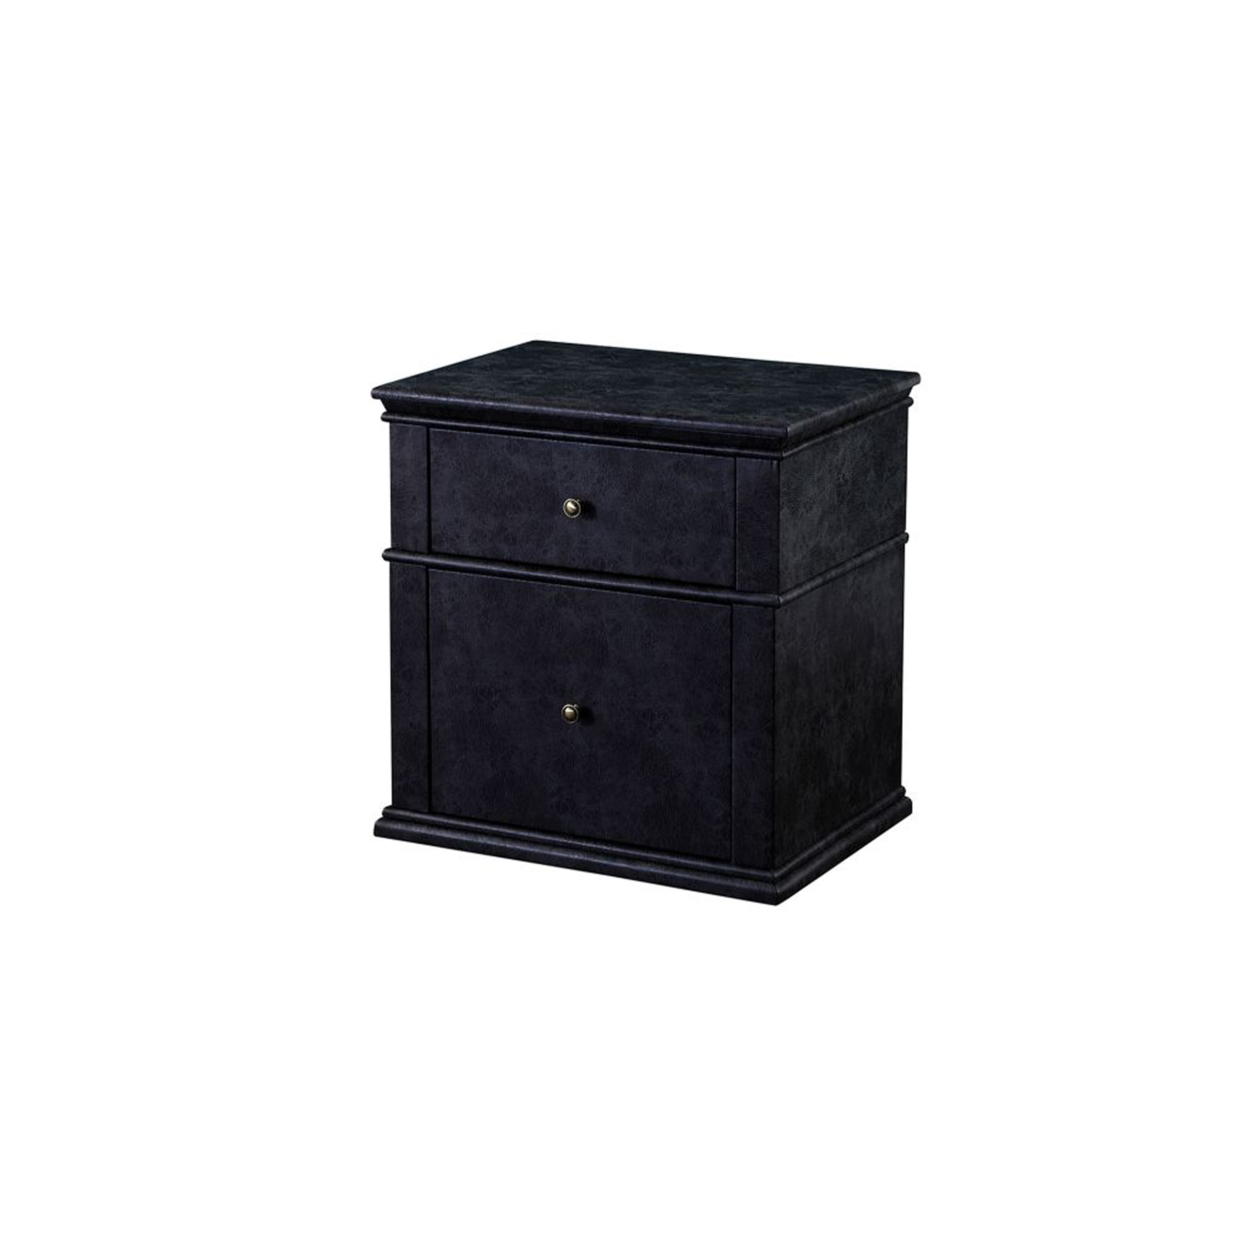 Textured Faux Leather Upholstered Wooden Nightstand With Two Drawers, Dark Gray- Saltoro Sherpi